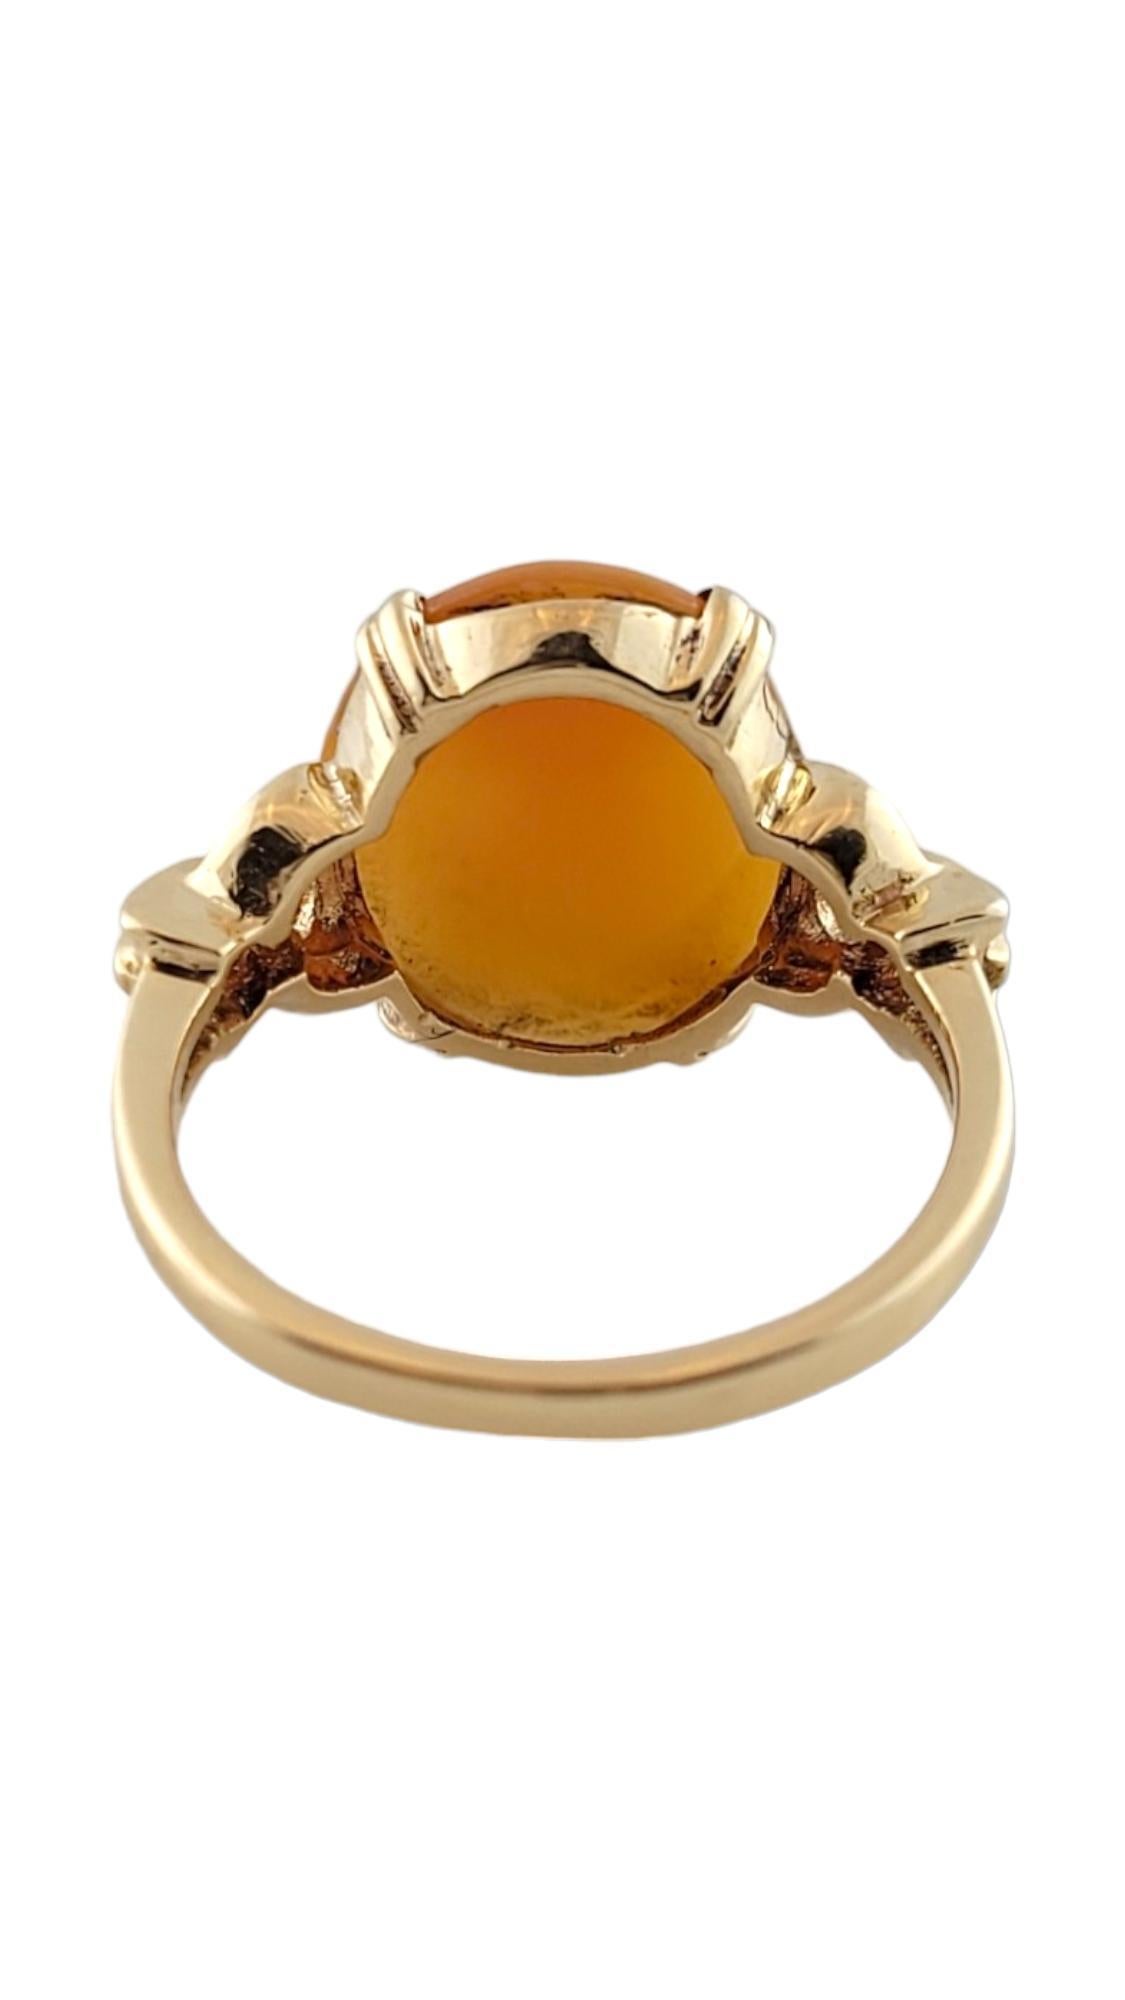 Women's 10K Yellow Gold Cameo Ring Size 6 #16155 For Sale